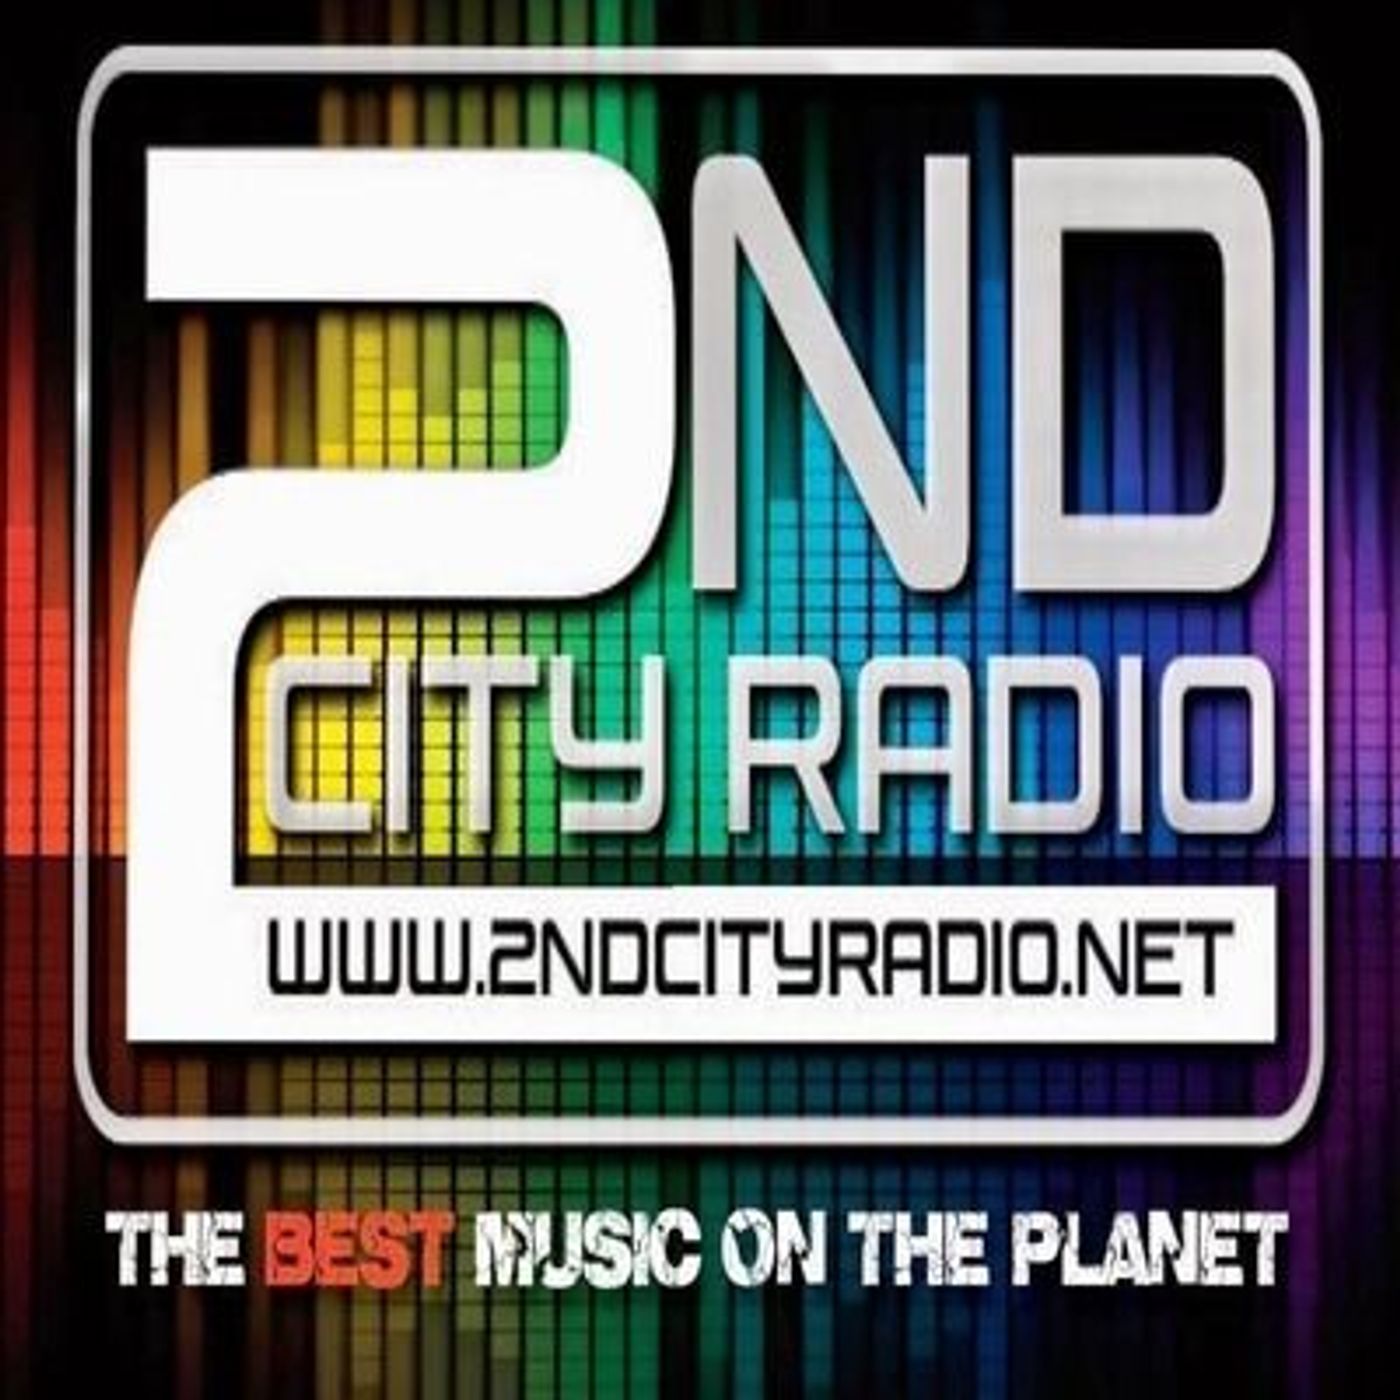 Wednesday the 11th of May 2022 on 2ndcity Radio with Classic Chat